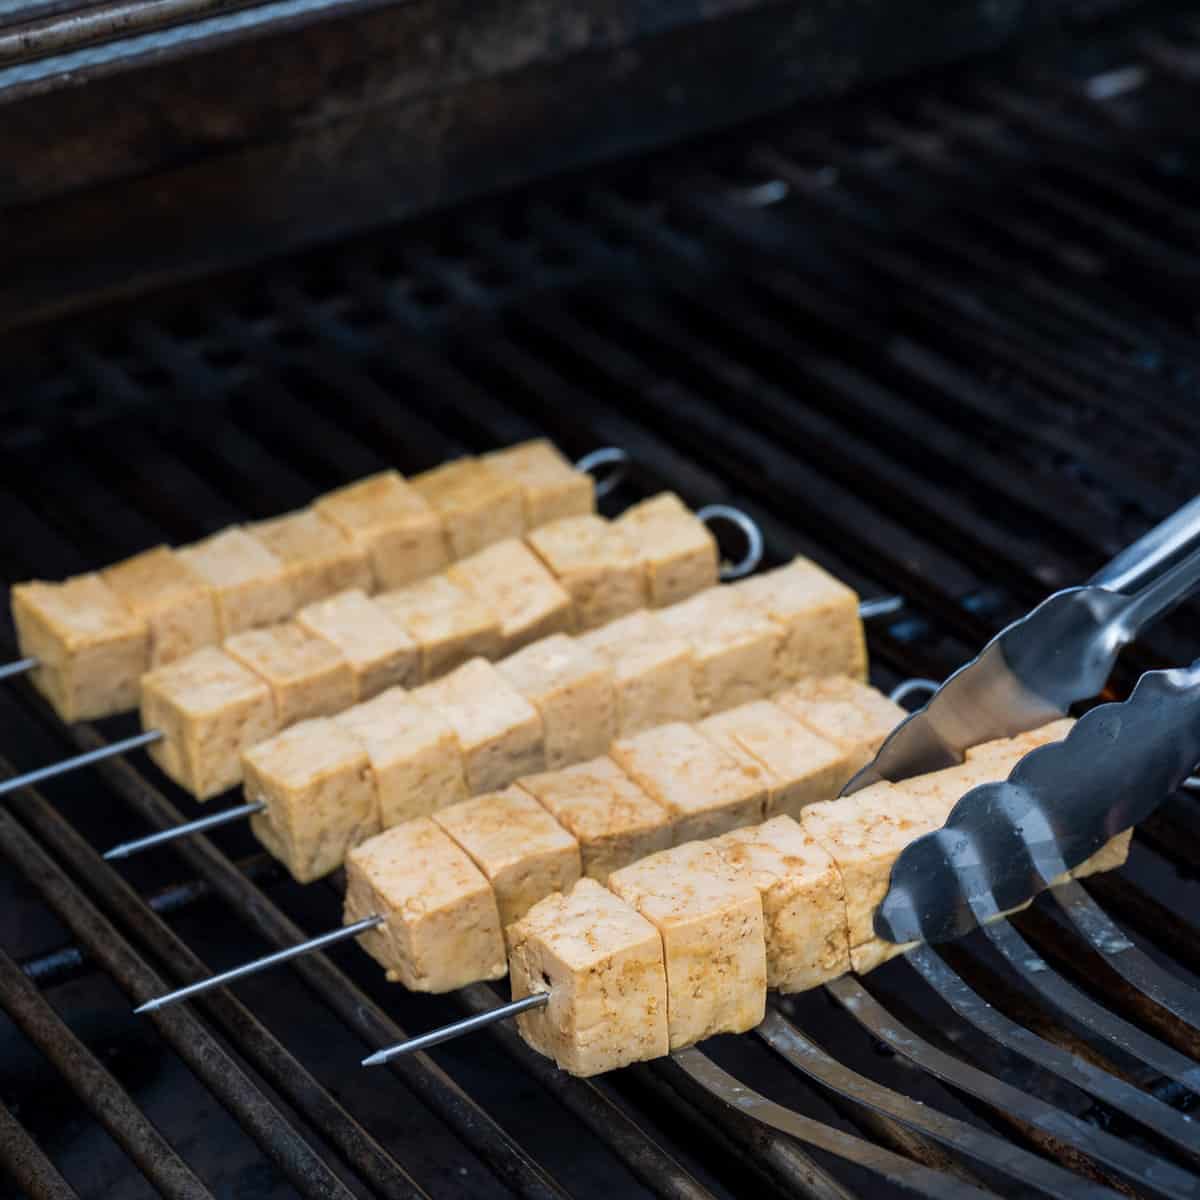 Tongs arranging tofu skewers on an outdoor gas grill.